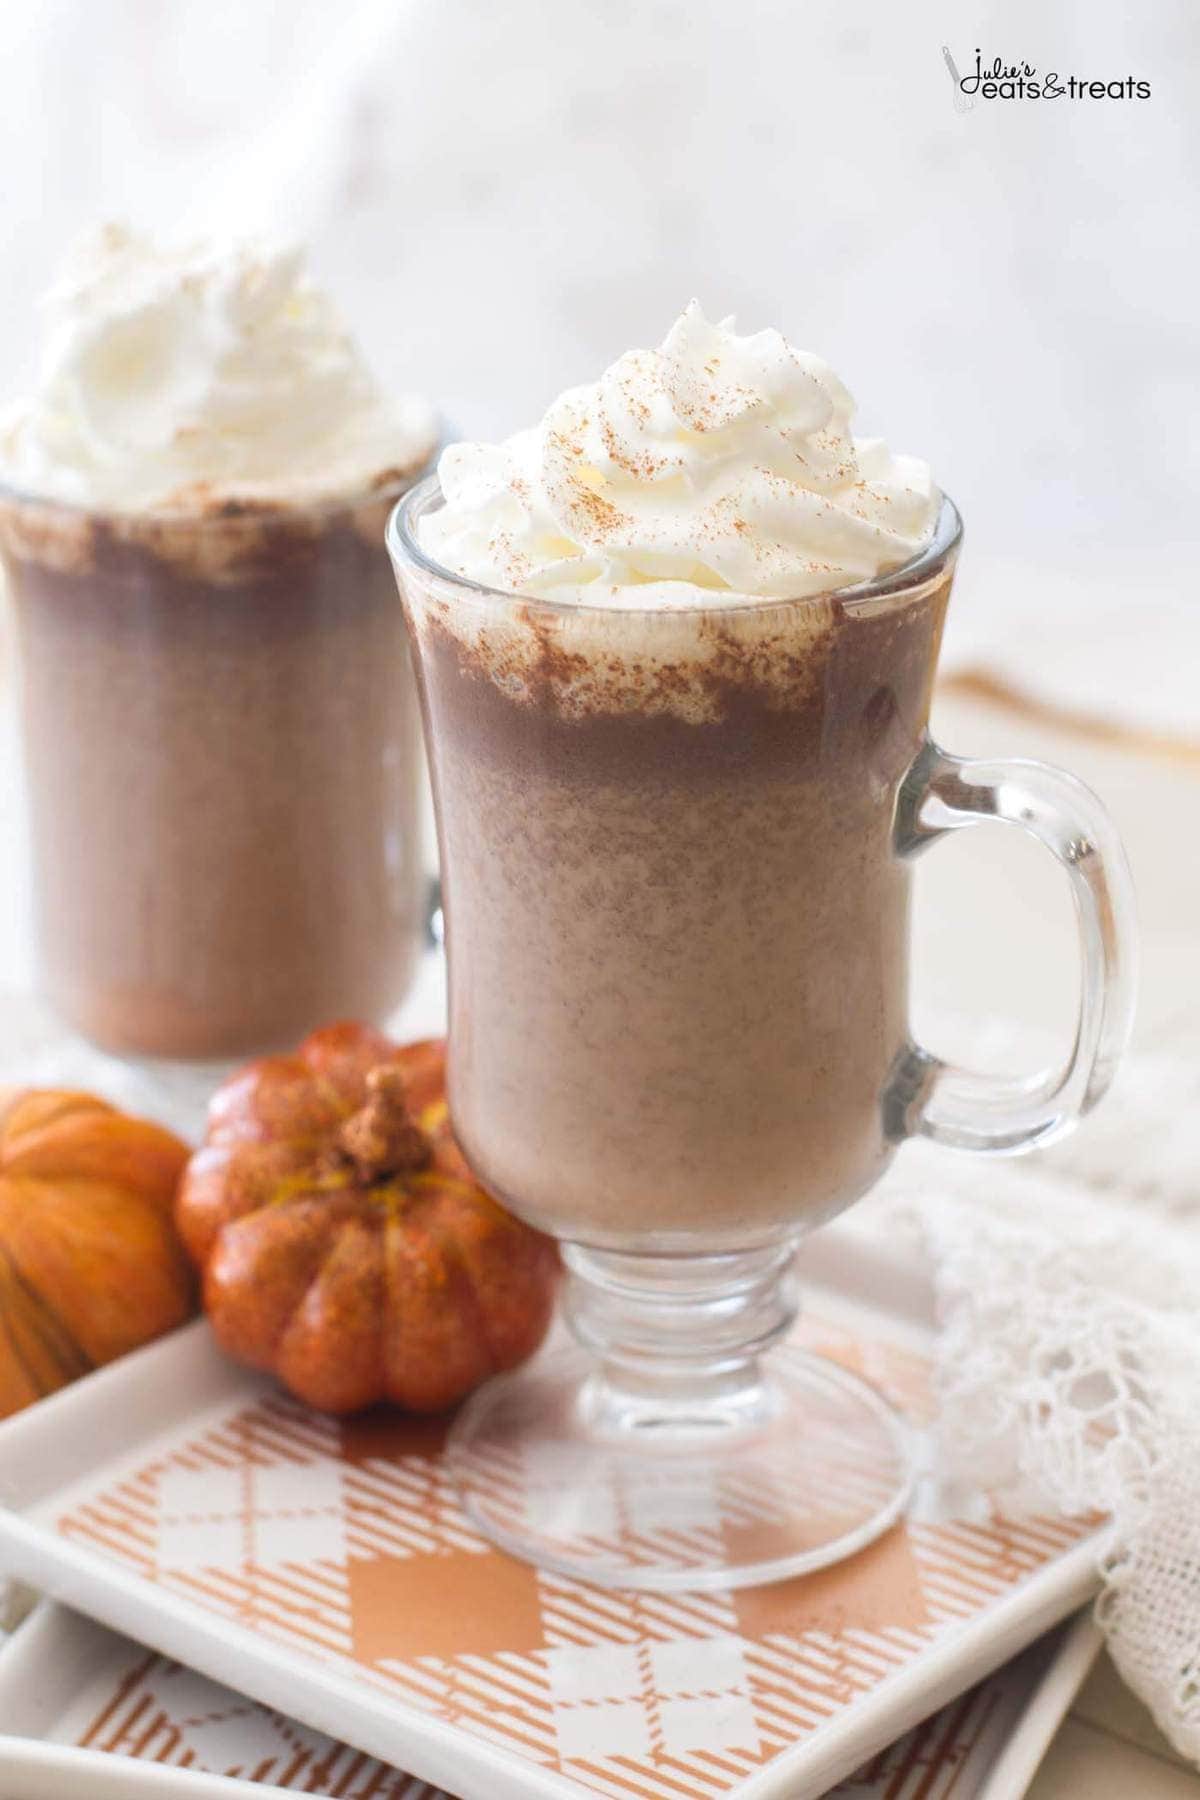 This homemade pumpkin hot chocolate recipe uses real pumpkin puree and pumpkin pie spices to add a fall spin to a classic drink!